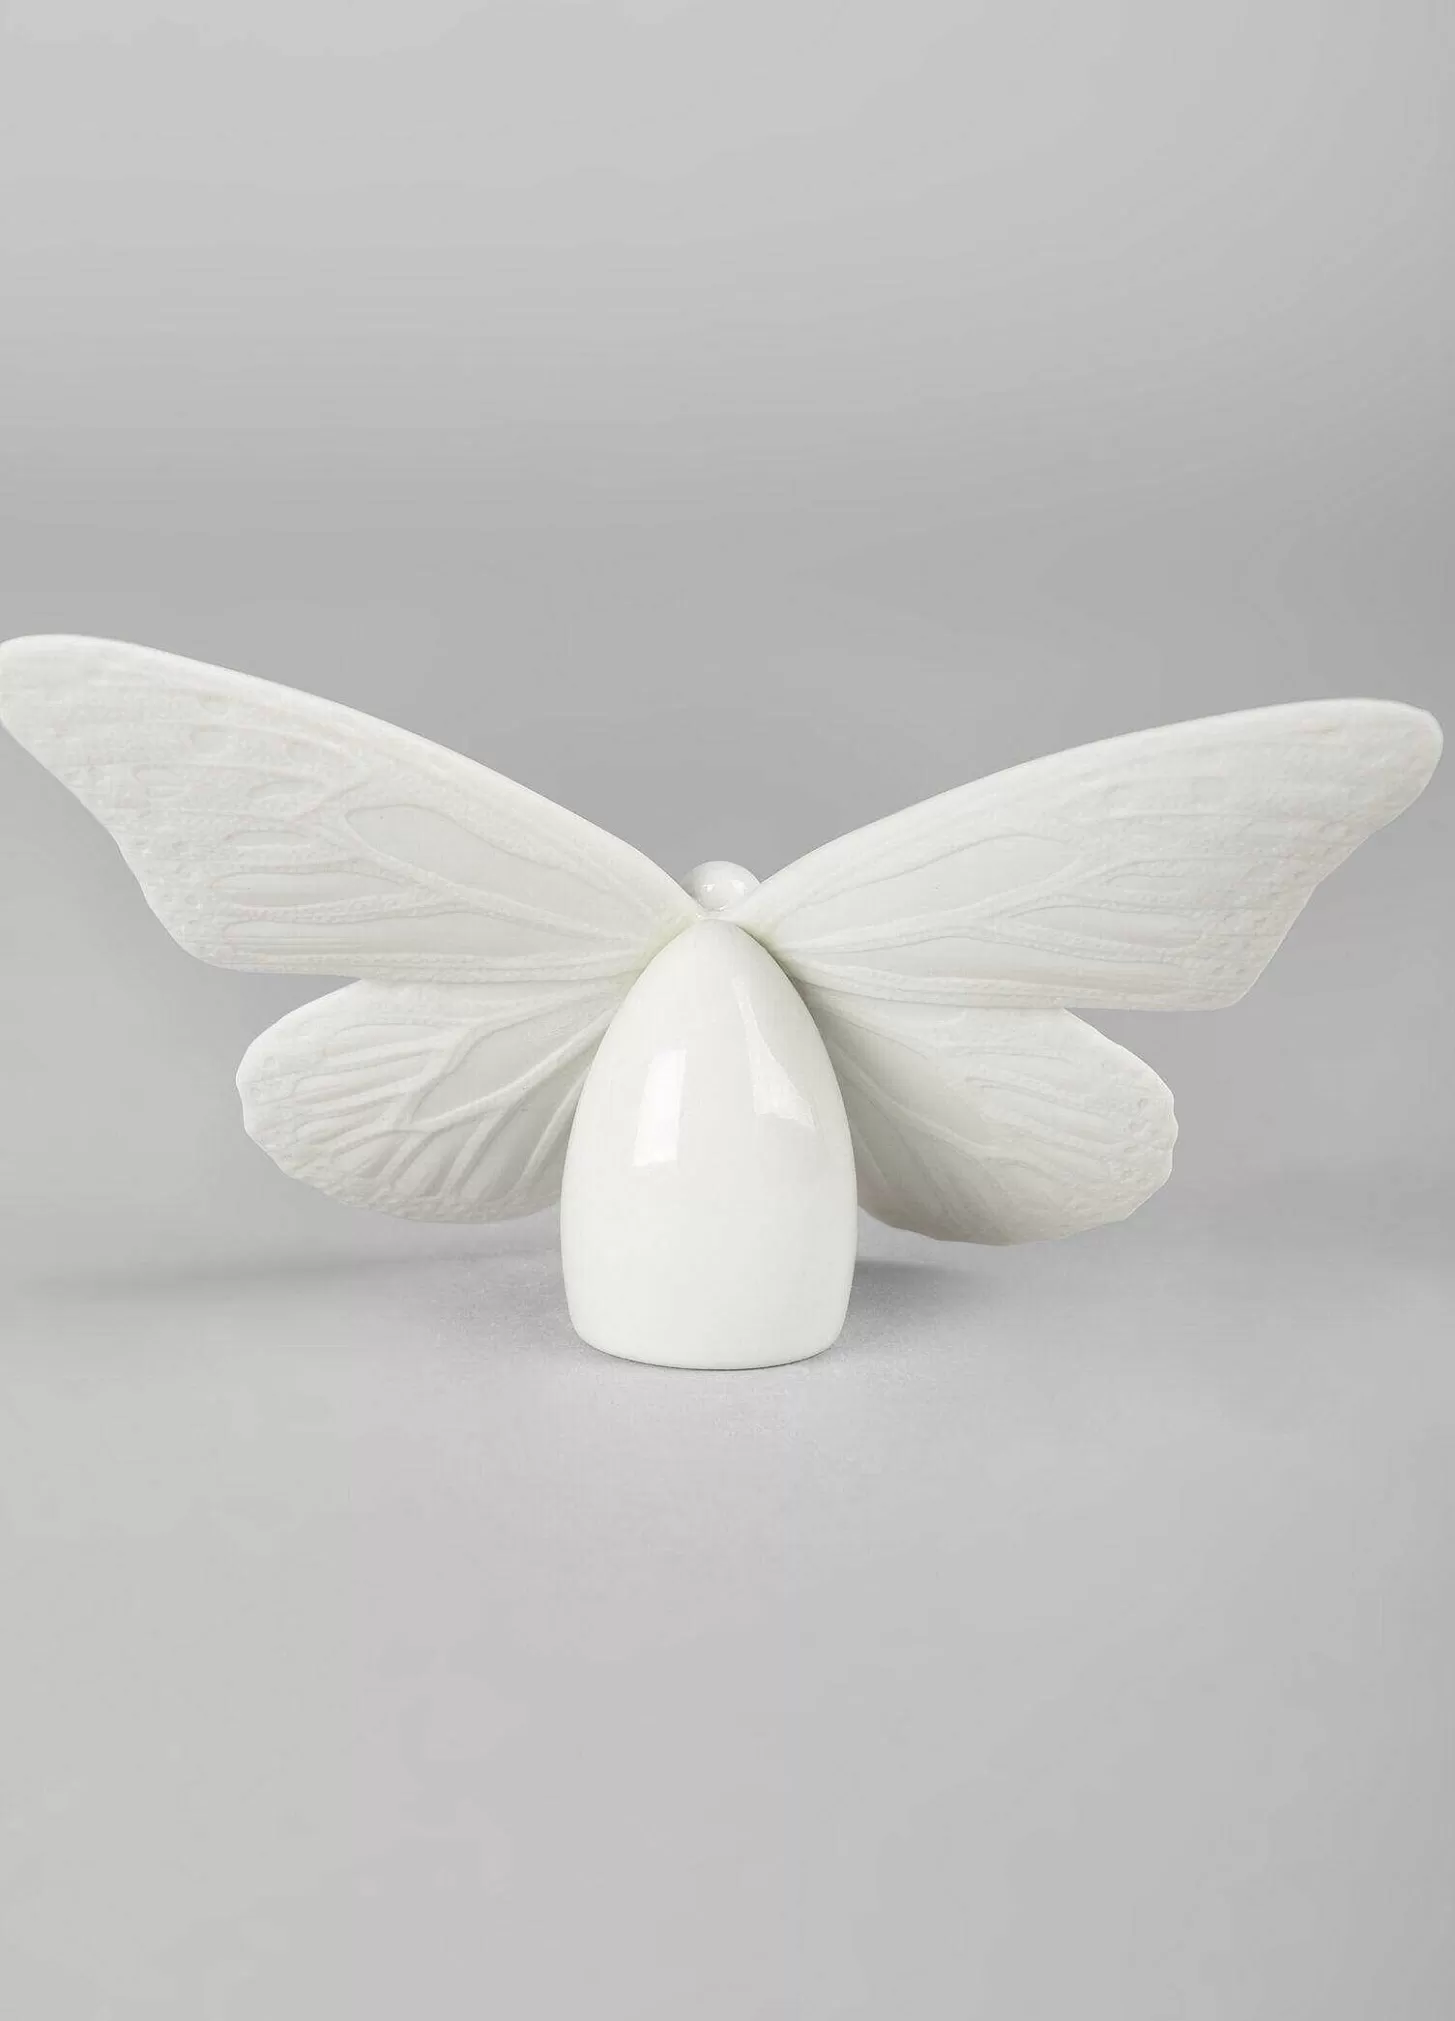 Lladró Butterfly Figurine. Golden Luster & White^ Gifts